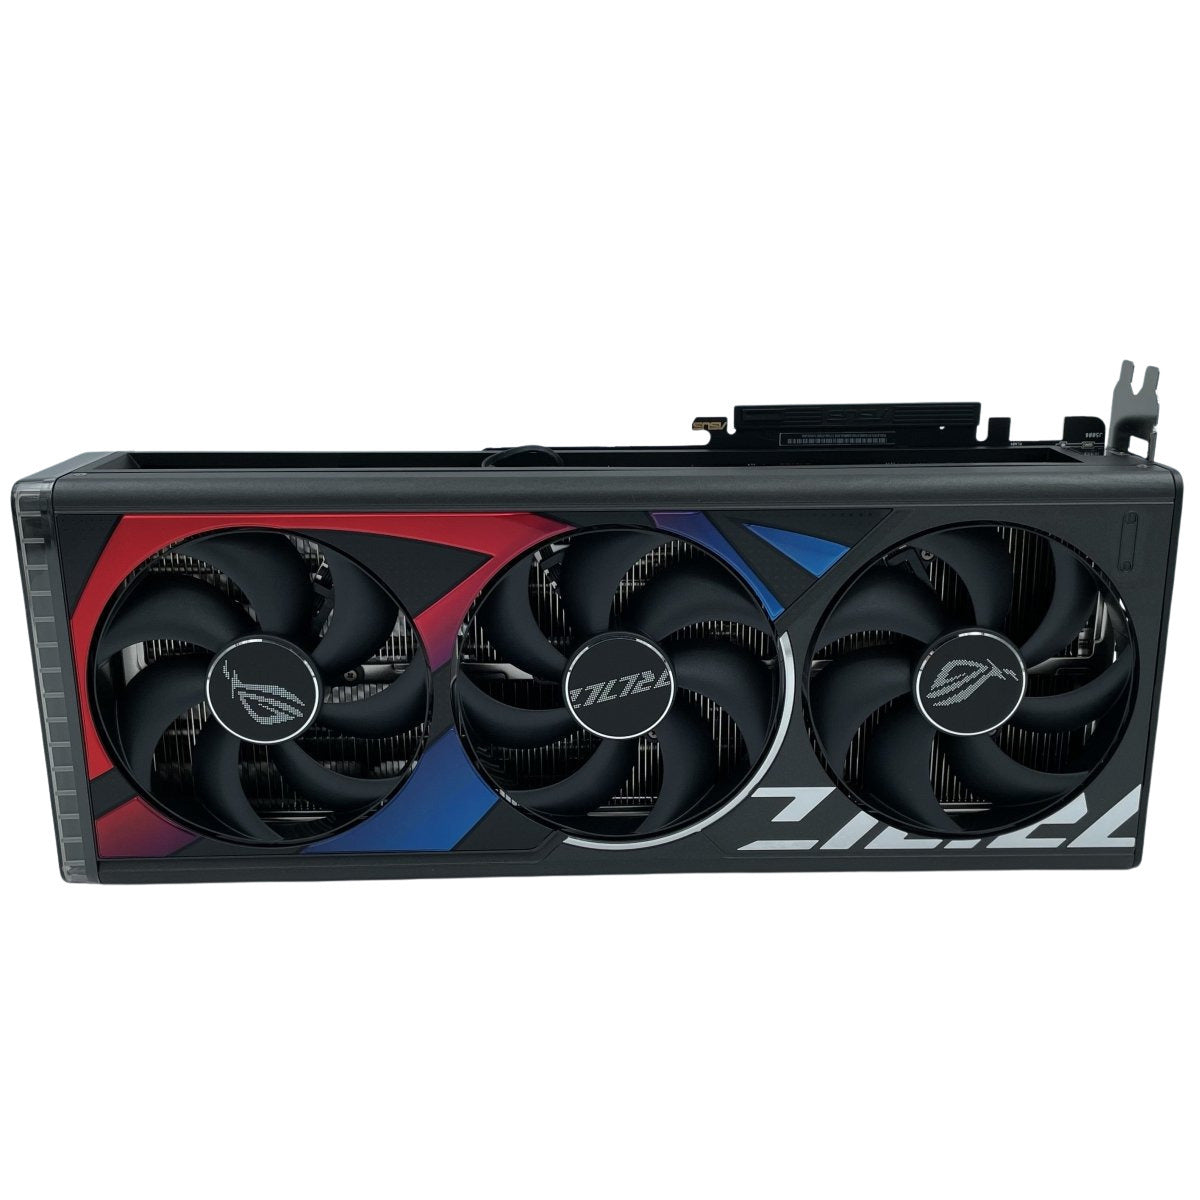 ASUS ROG Strix GeForce RTX 4080 OC Edition Gaming Graphics Card White (PCIe  4.0, 16GB GDDR6X, HDMI 2.1a, DisplayPort 1.4a, DLSS3 Support, Supports 4K)